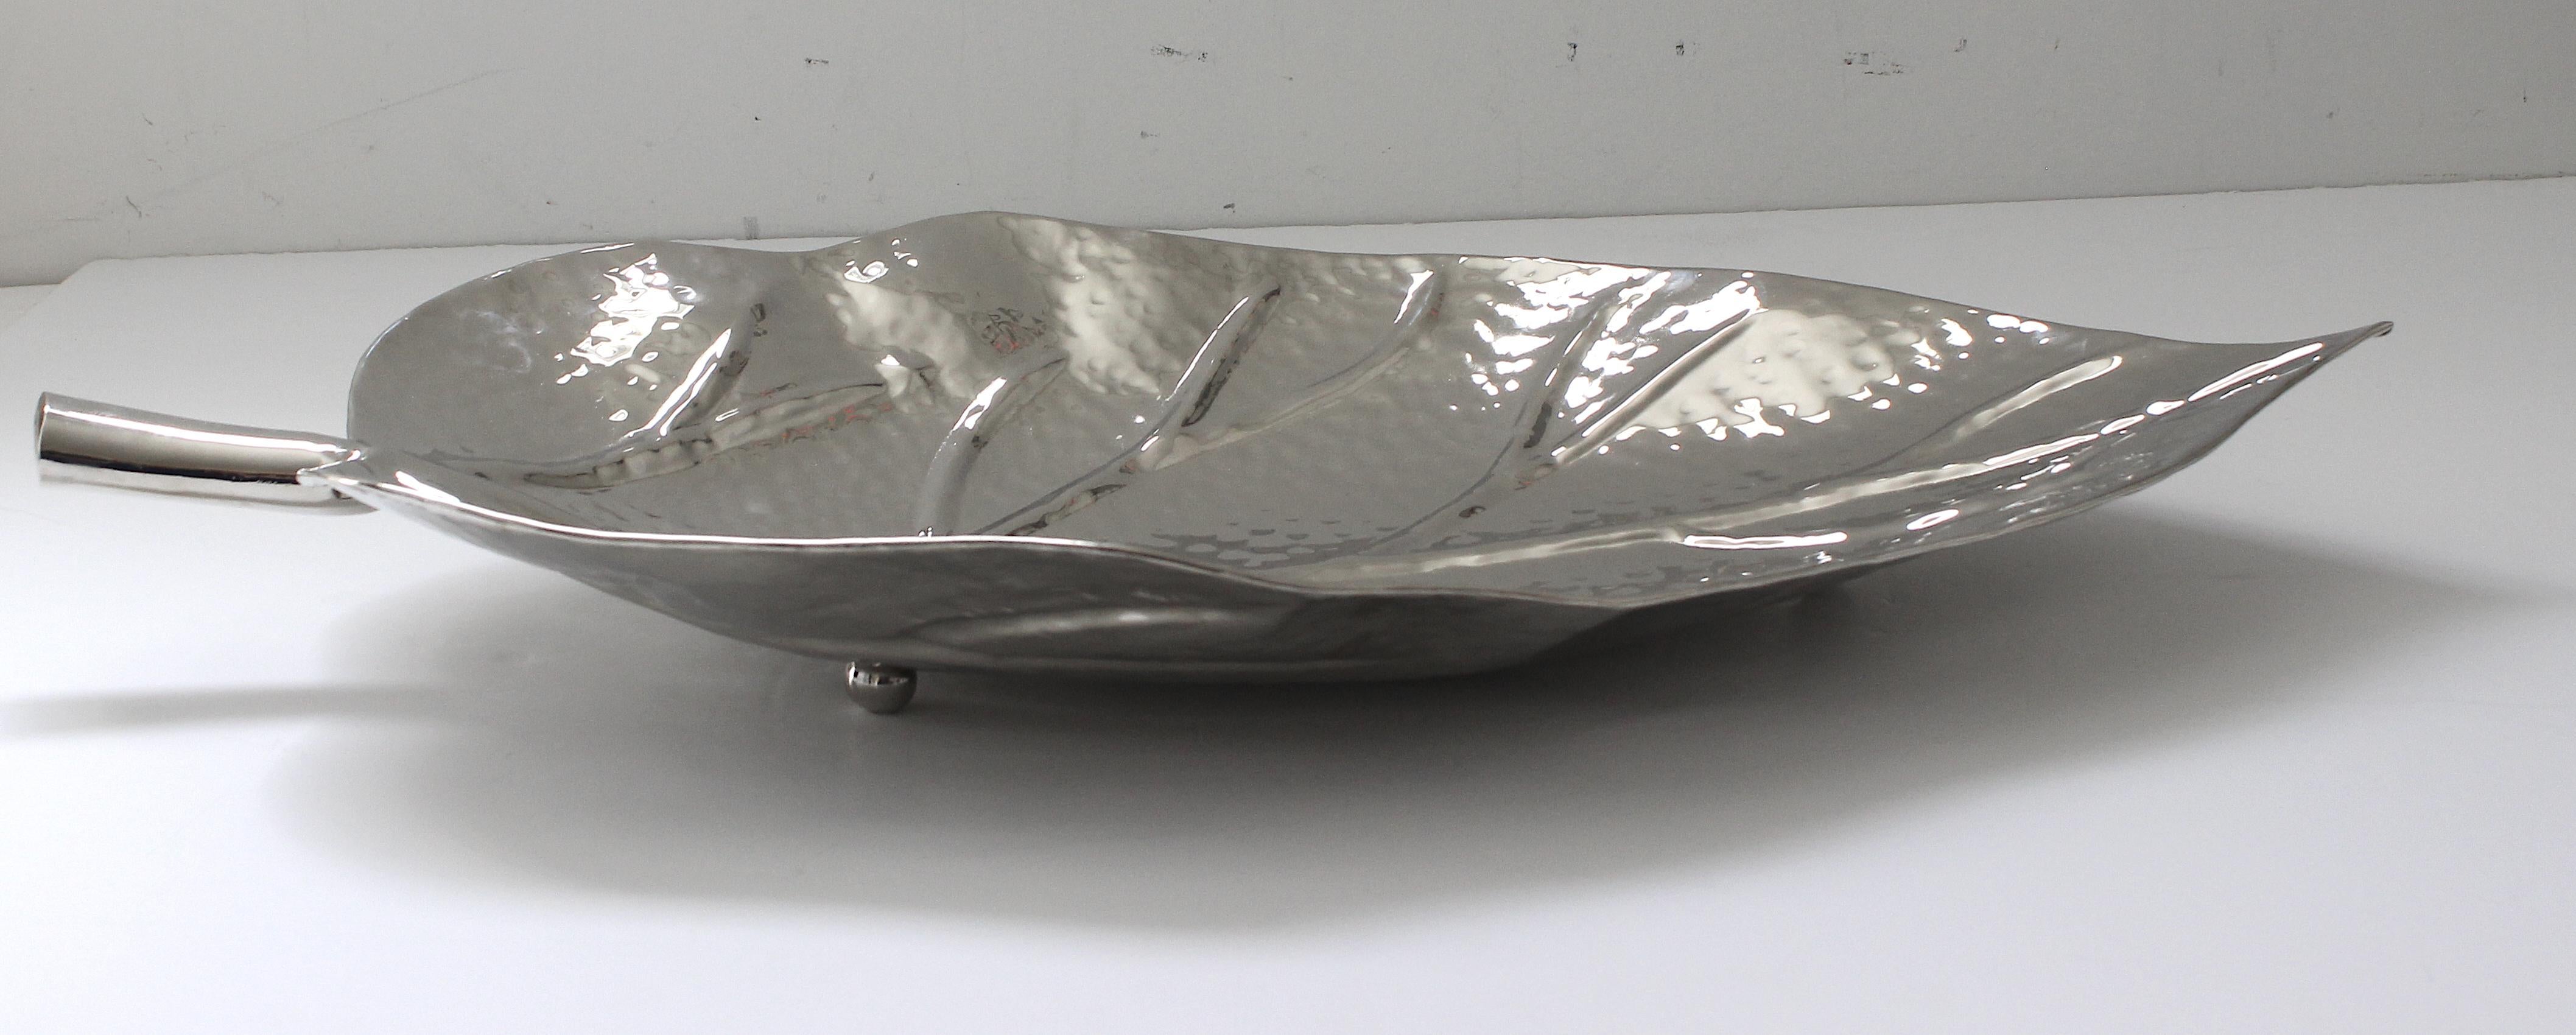 Nickel Plated Leaf Form Serving Tray by Iconic Snob Galeries For Sale 4